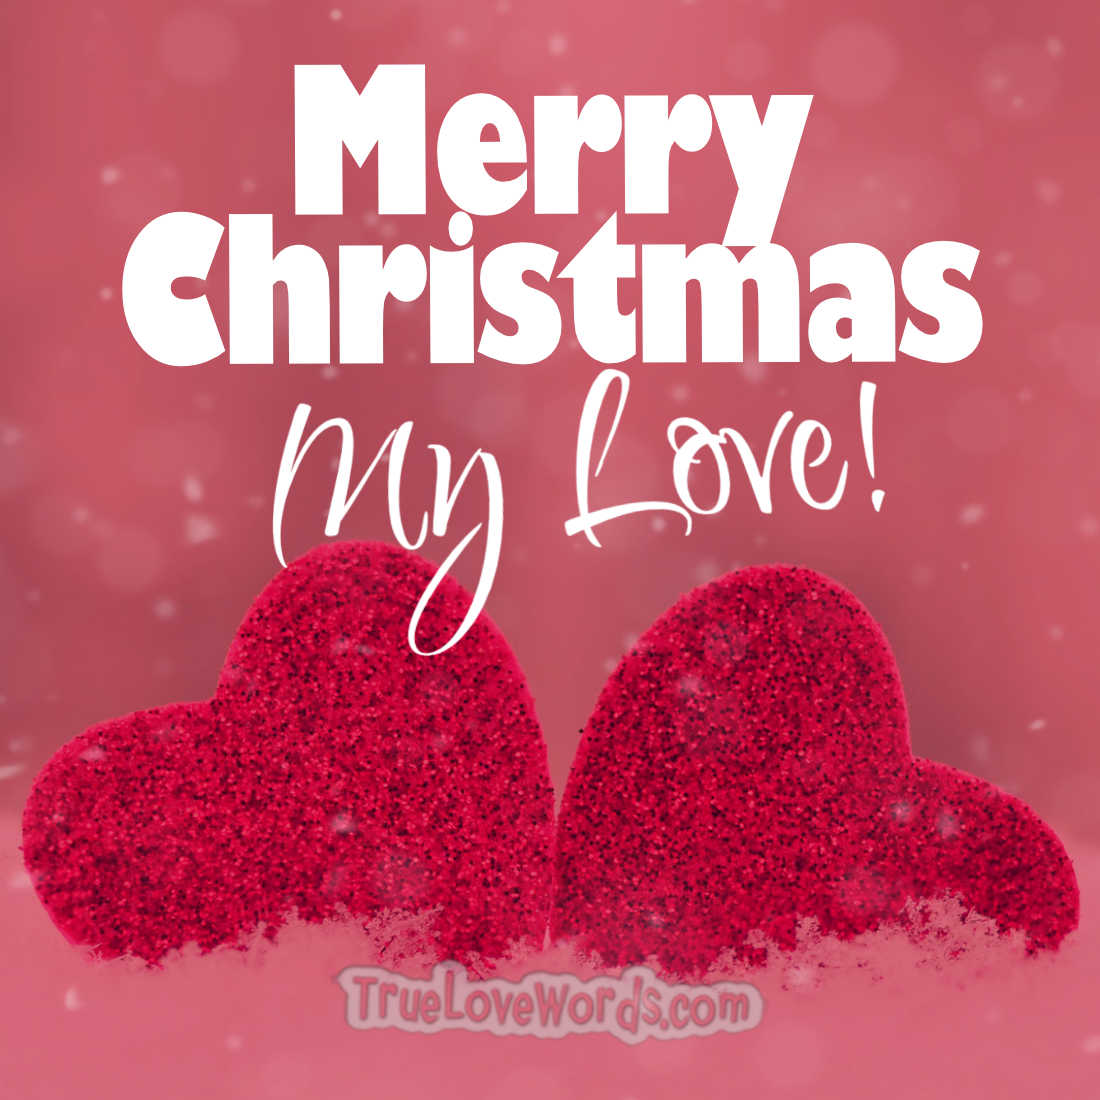 Top 999+ love merry christmas images – Amazing Collection love merry christmas images Full 4K